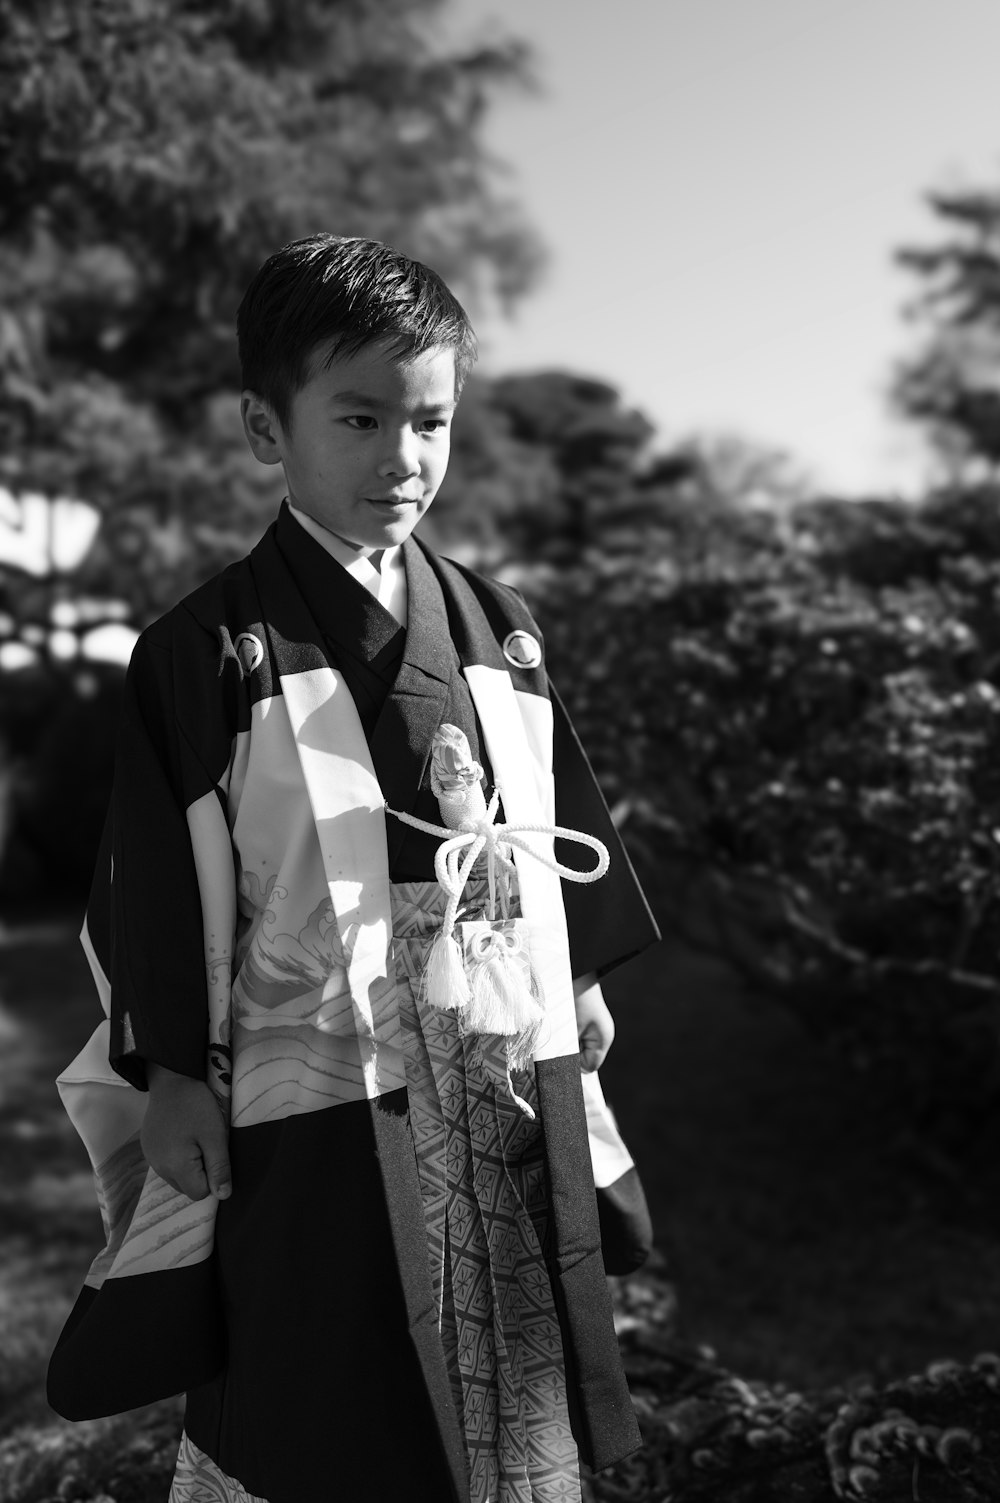 a young boy dressed in traditional japanese clothing